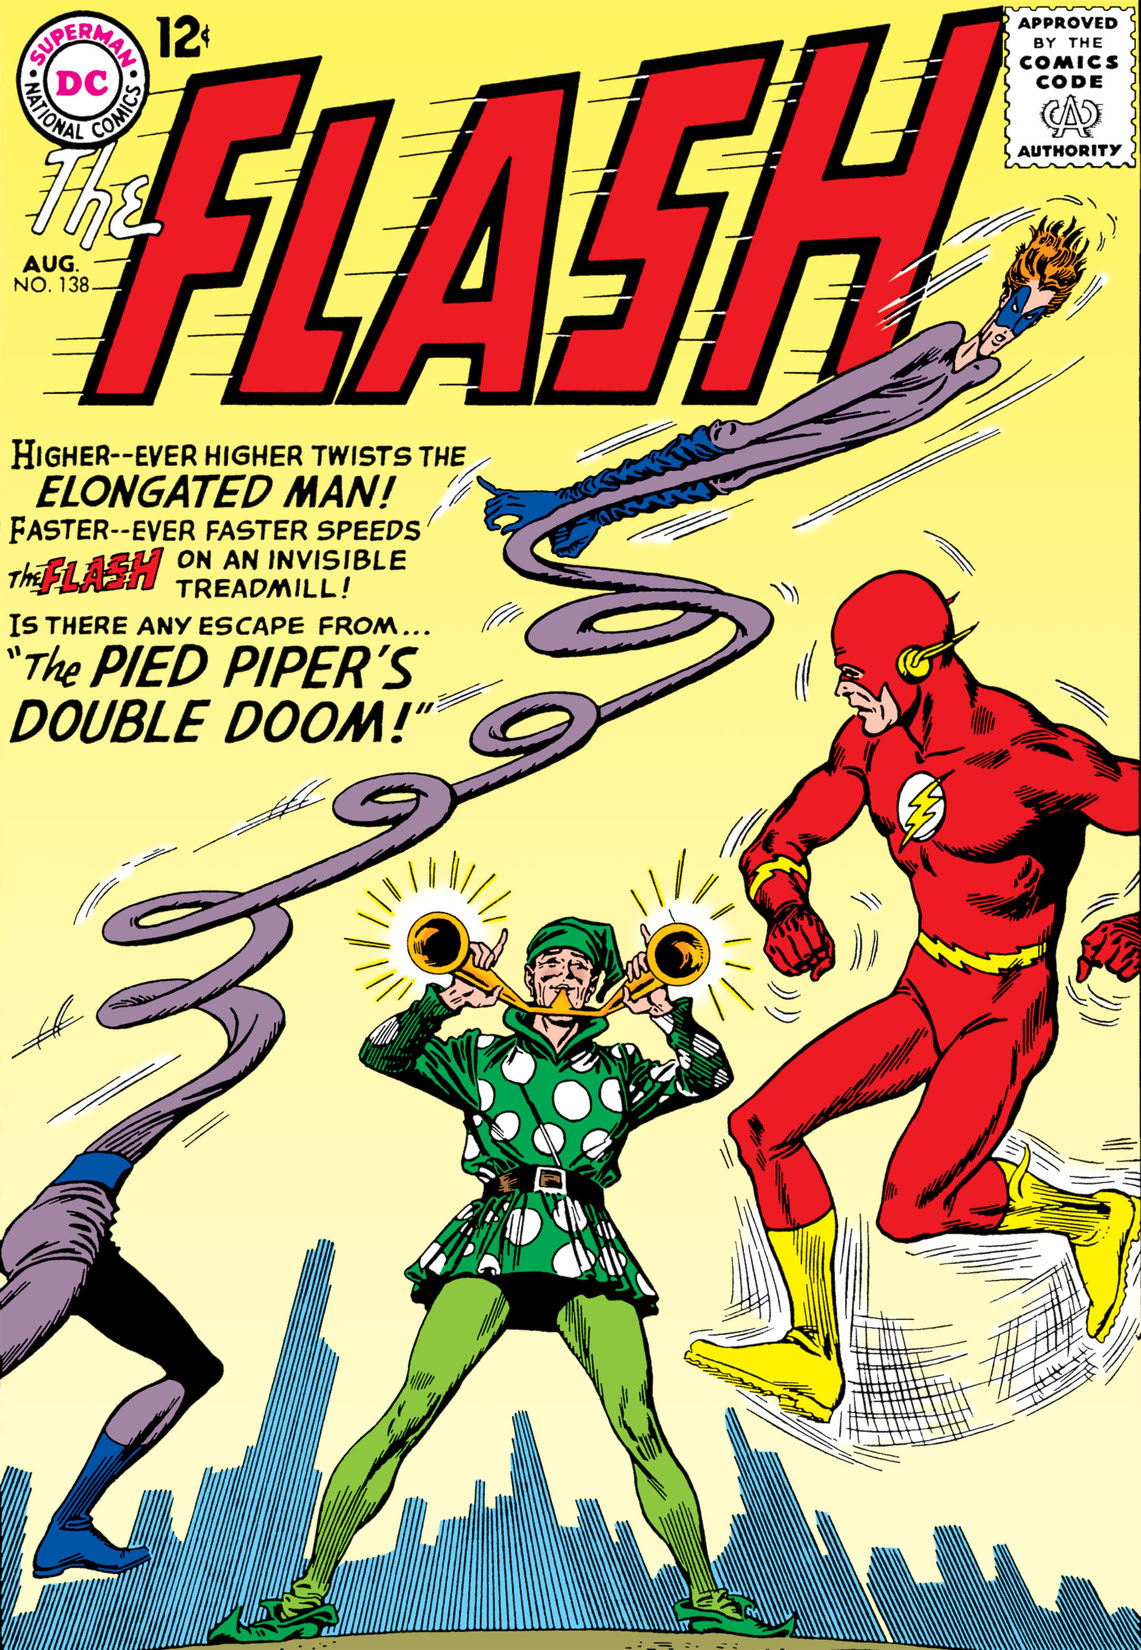 The Flash (1959-) #138 preview images